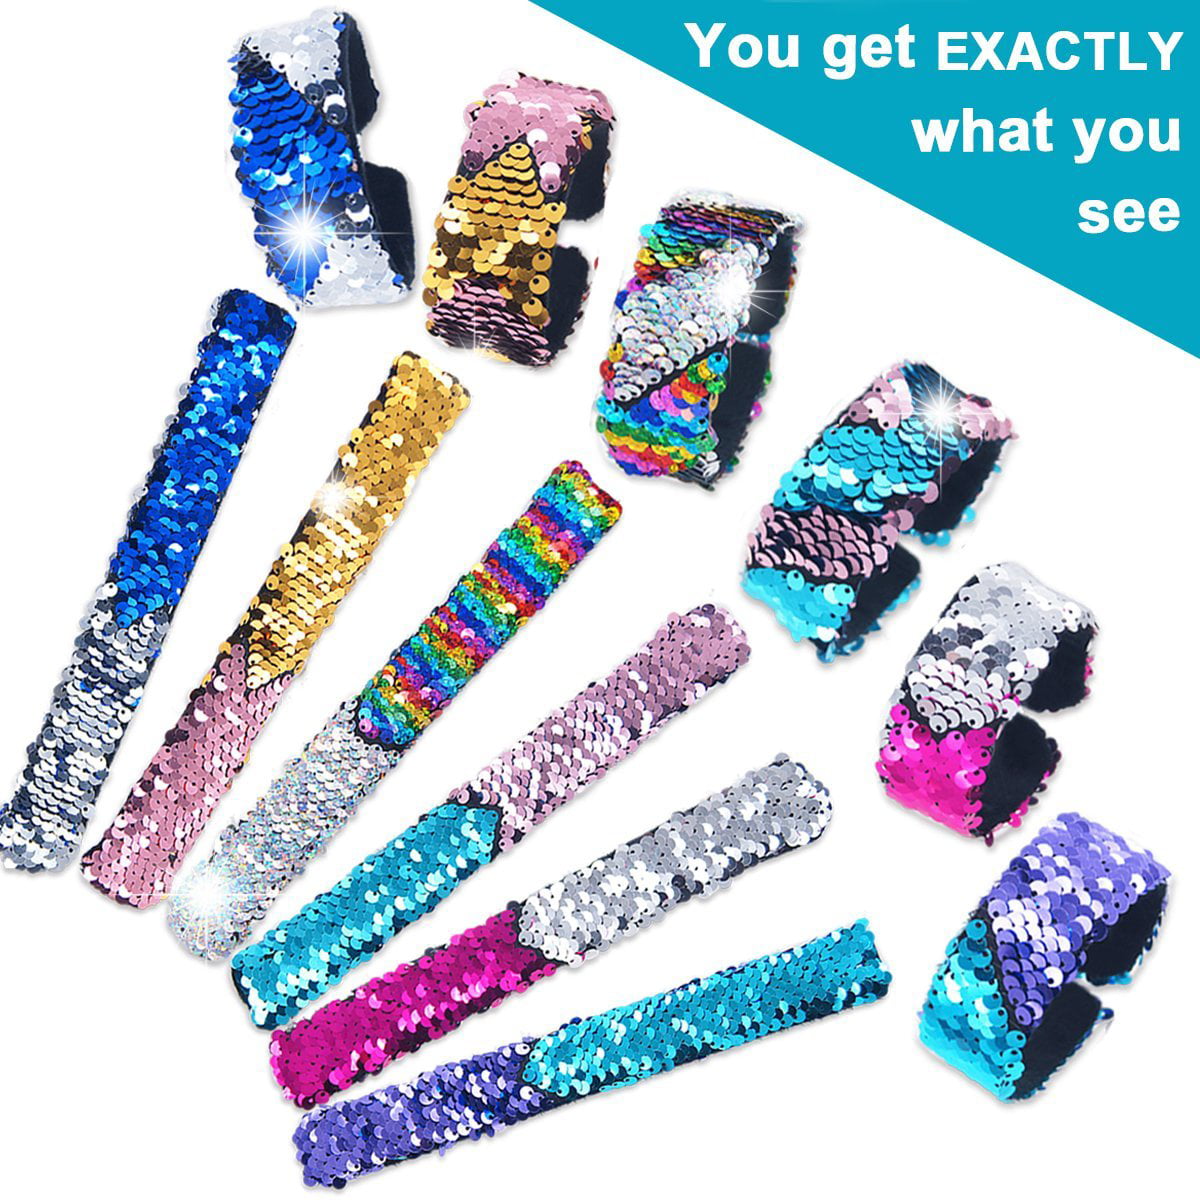 Cute Mermaid Theme Birthday Party Favors Boys Girls Party Favors Gifts Carnival Prizes Set （6 Pack N//H Silicone Mermaid Slap Bracelets